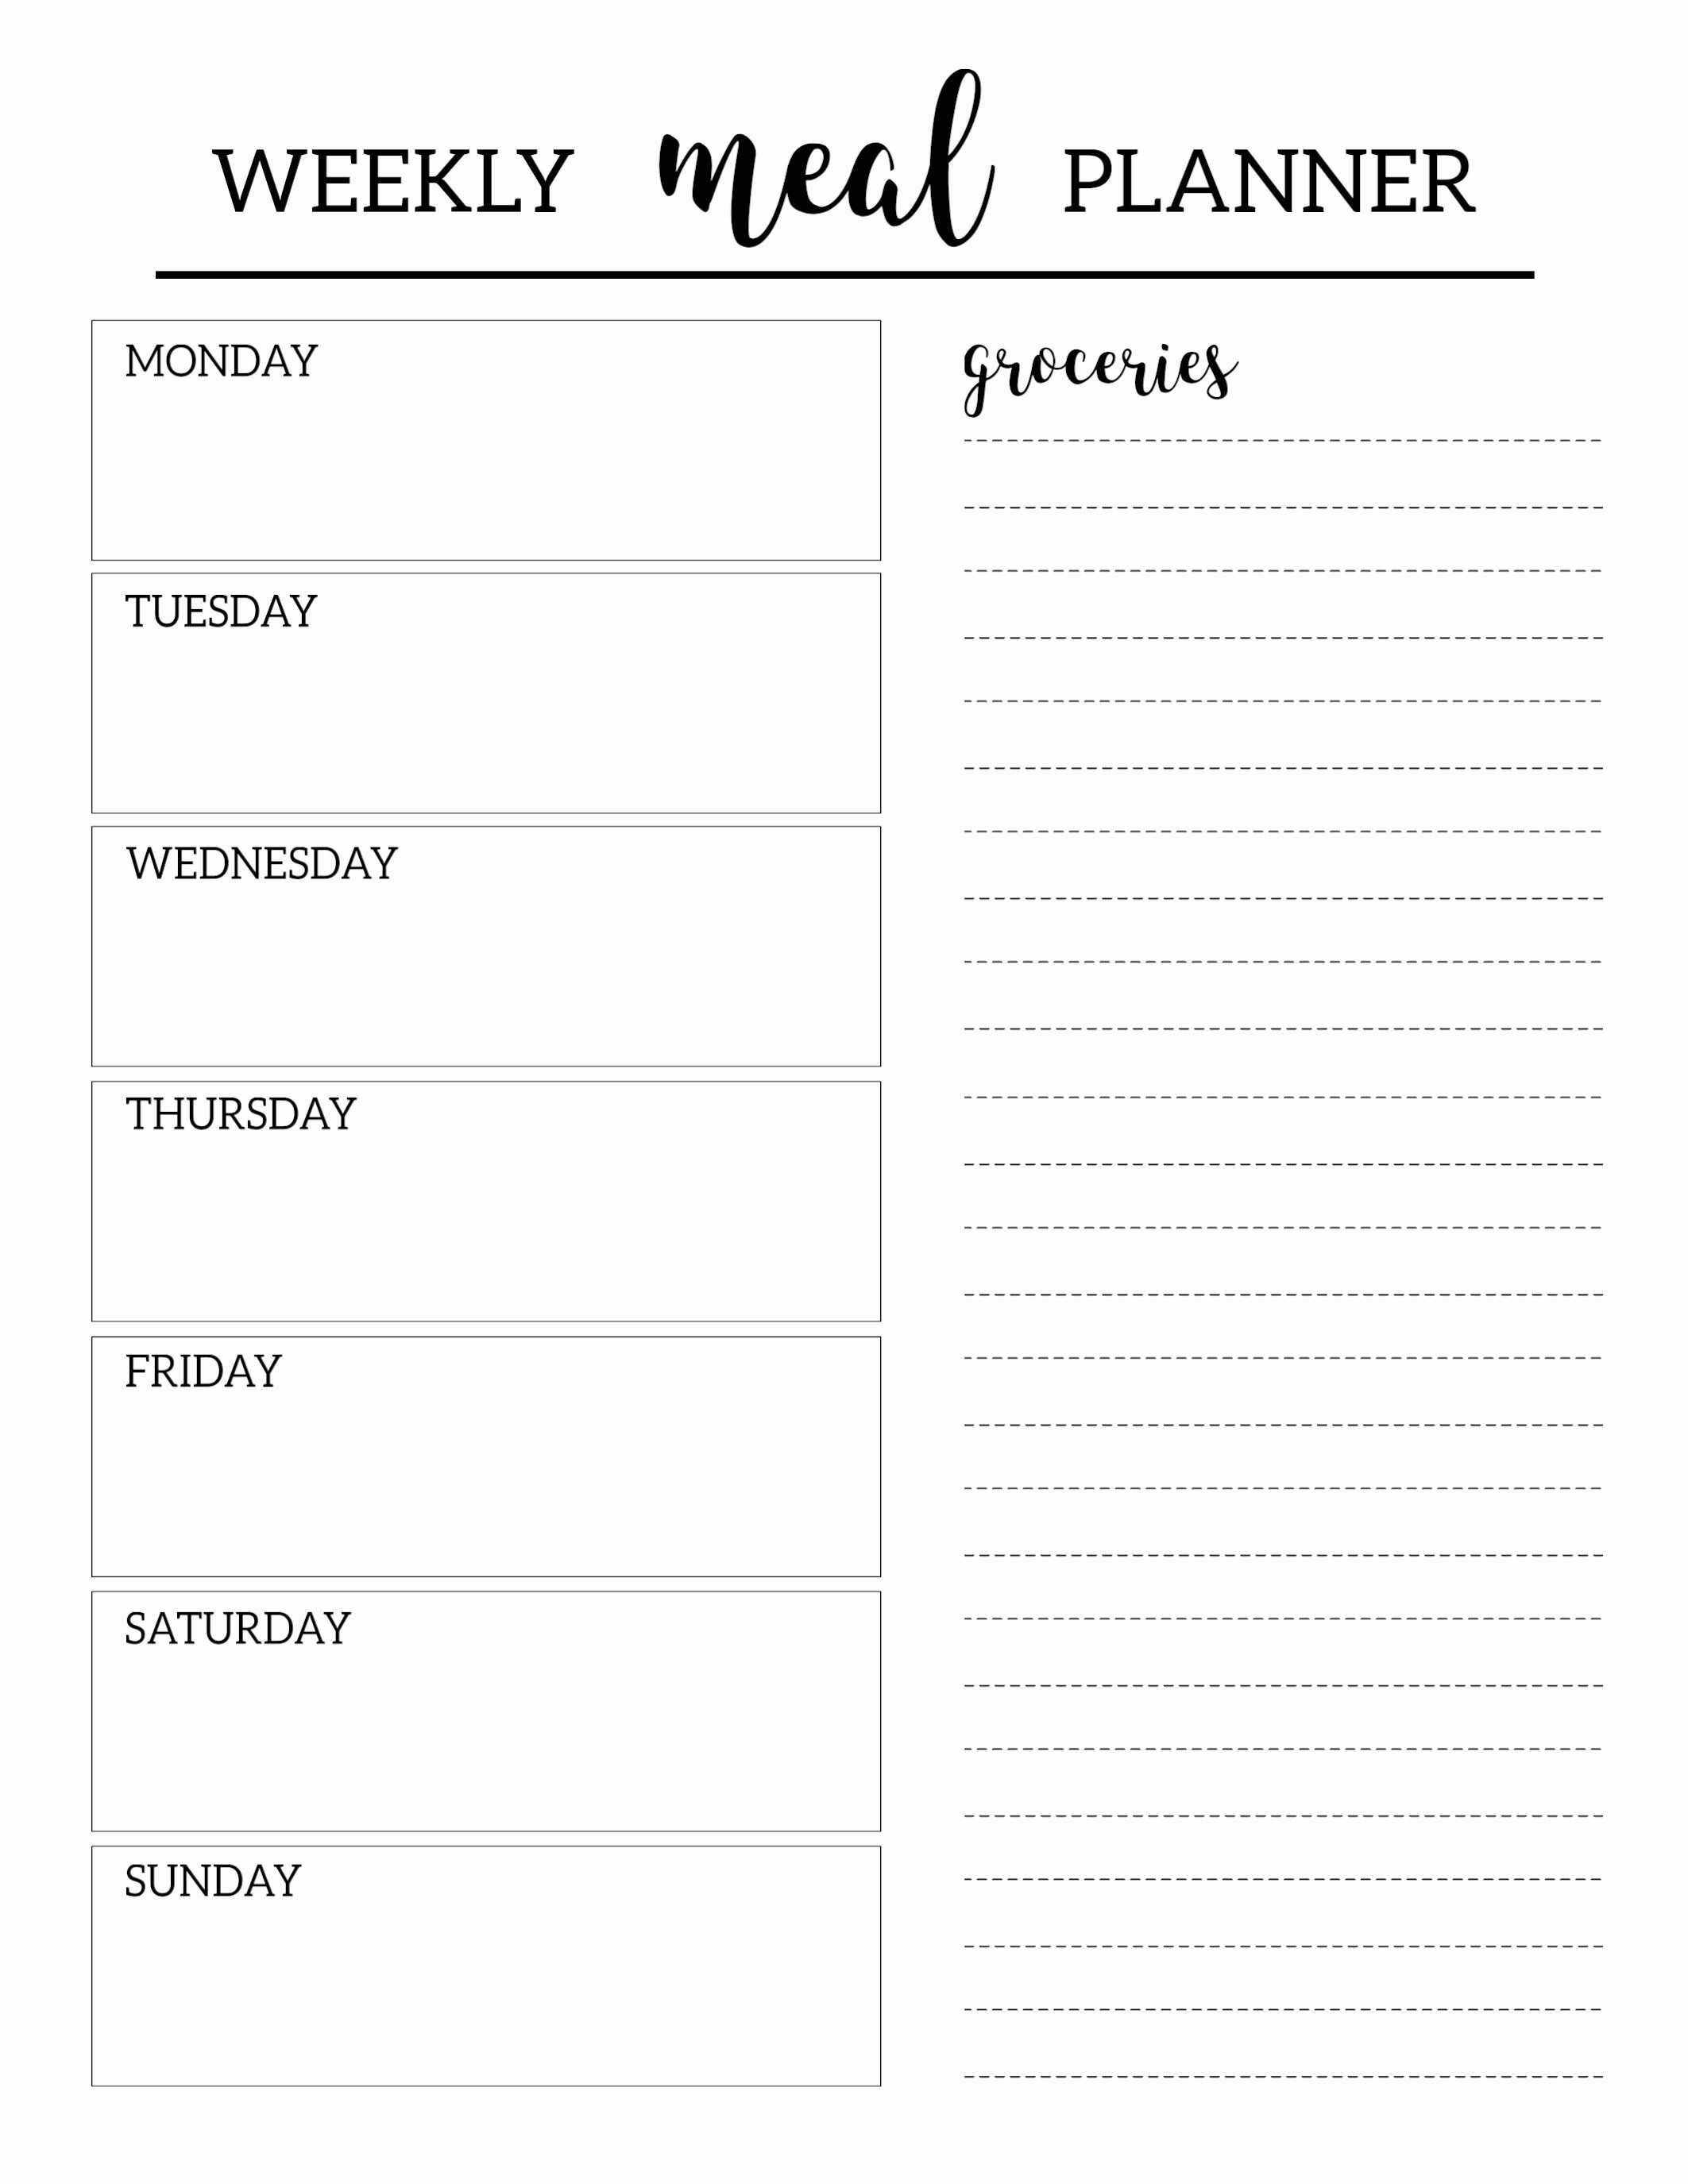 Weekly Meal Planner Templates Free Awesome Free Printable Meal Planner Template organization